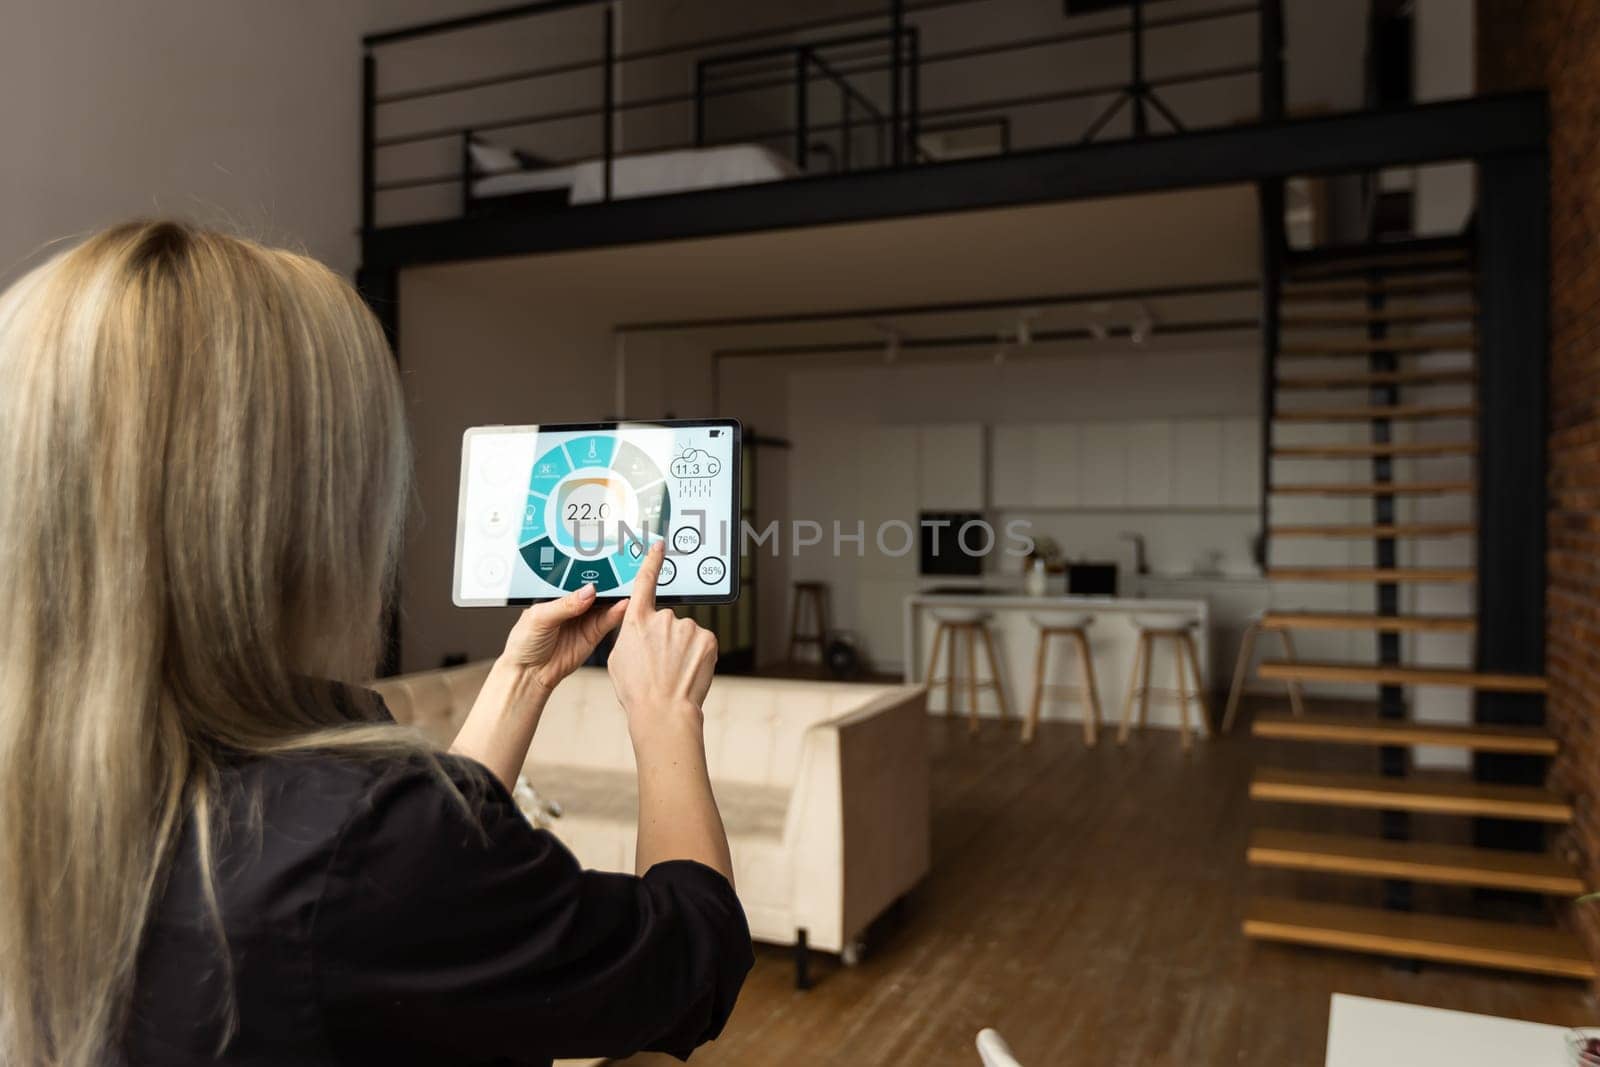 Woman controlling smart home devices using a digital tablet with launched application in the white room. Smart home concept.